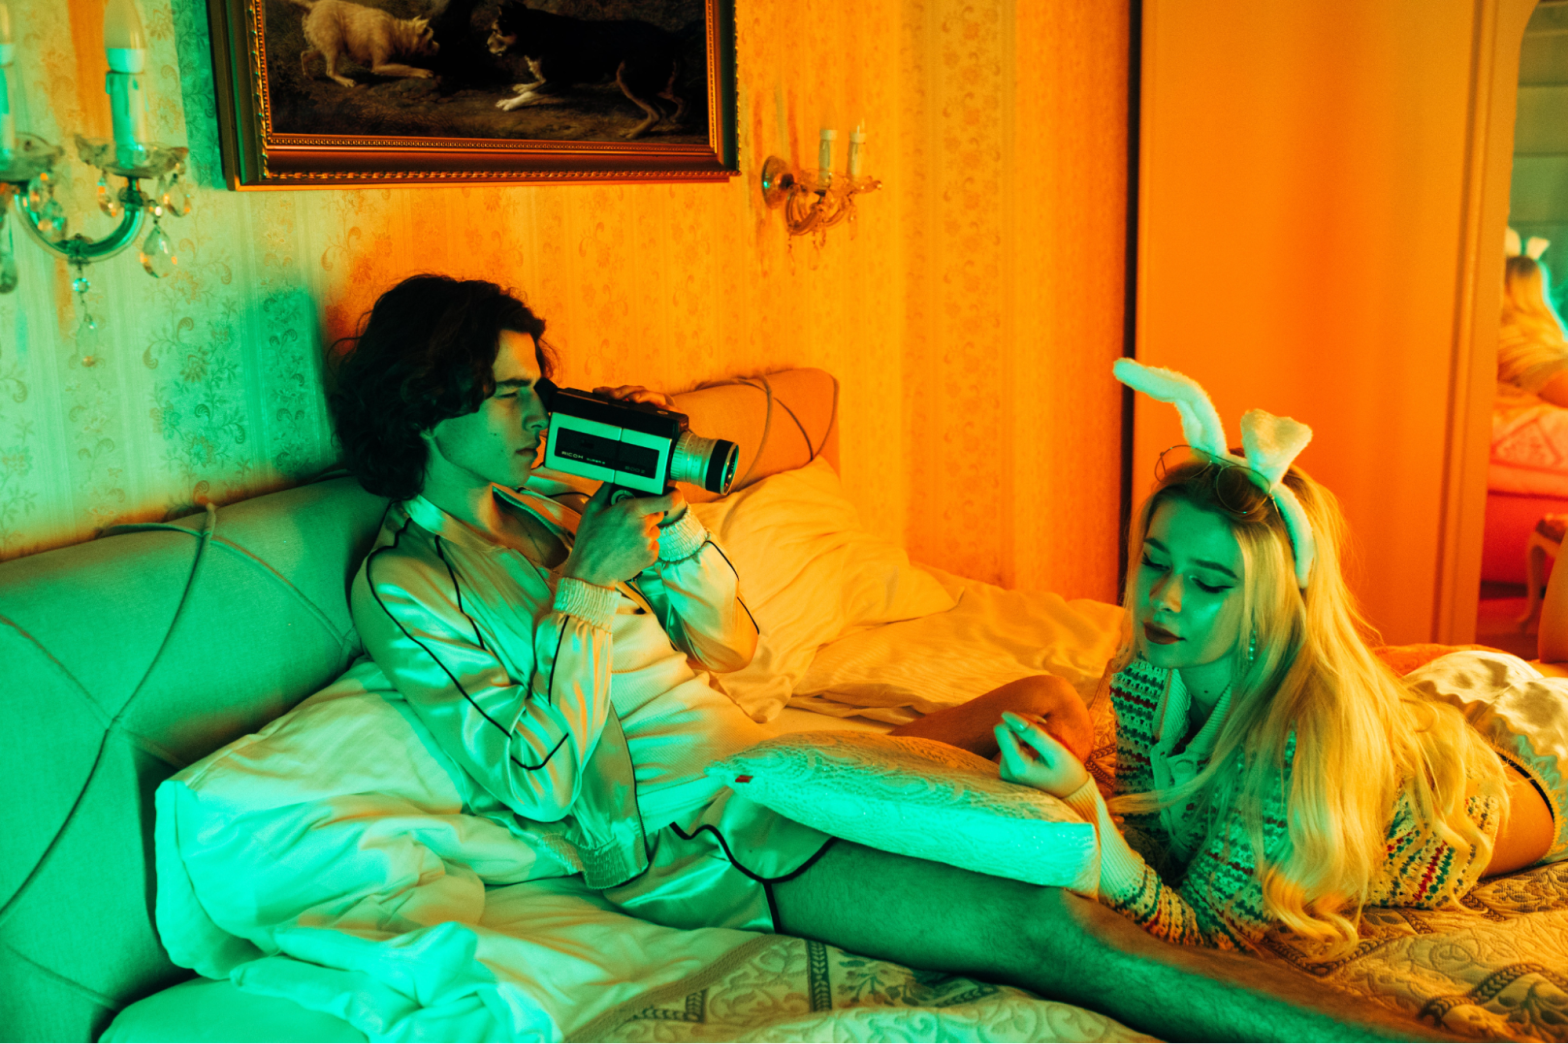 man-filming-woman-in-bed-with-bunny-ears